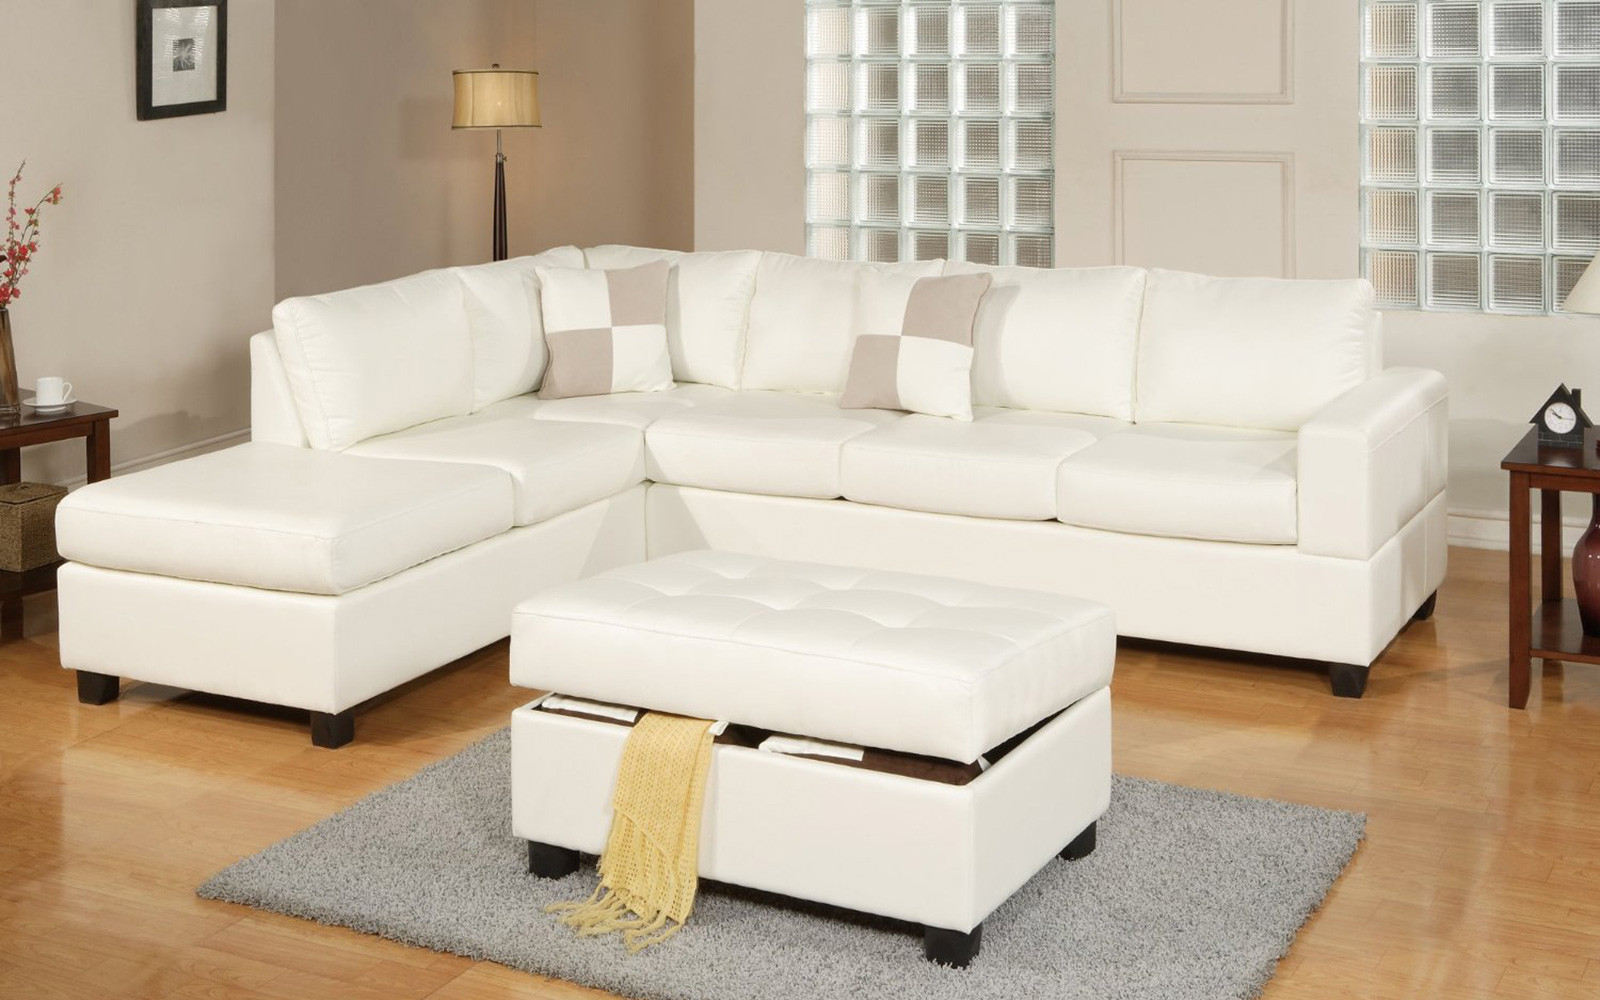 white sectional sofa 3 piece modern reversible tufted bonded leather sectional sofa with ottoman  - CYCLSMZ